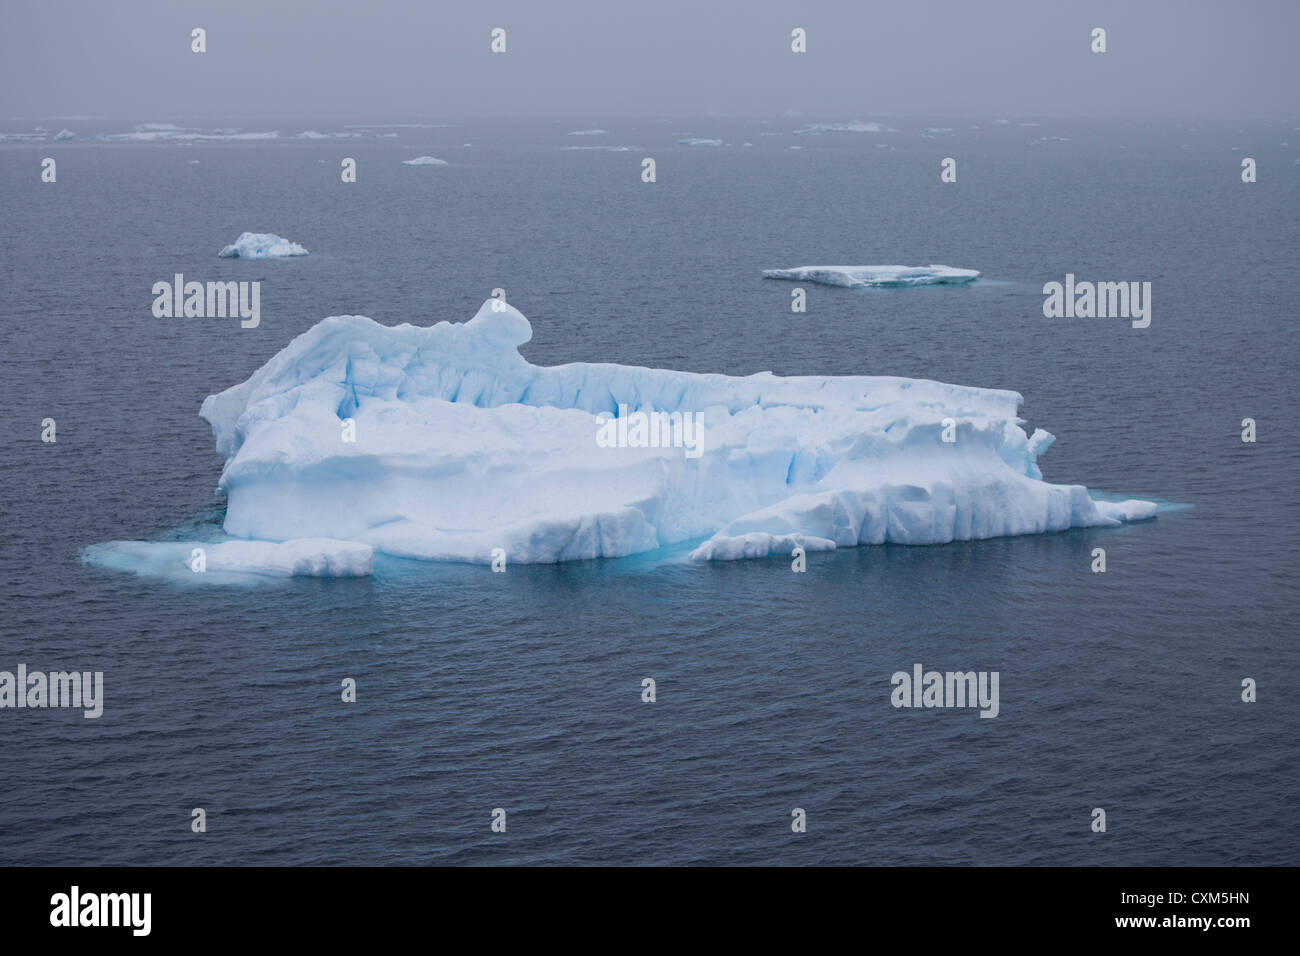 Ice floes in the Weddell Sea, Antarctica. Stock Photo